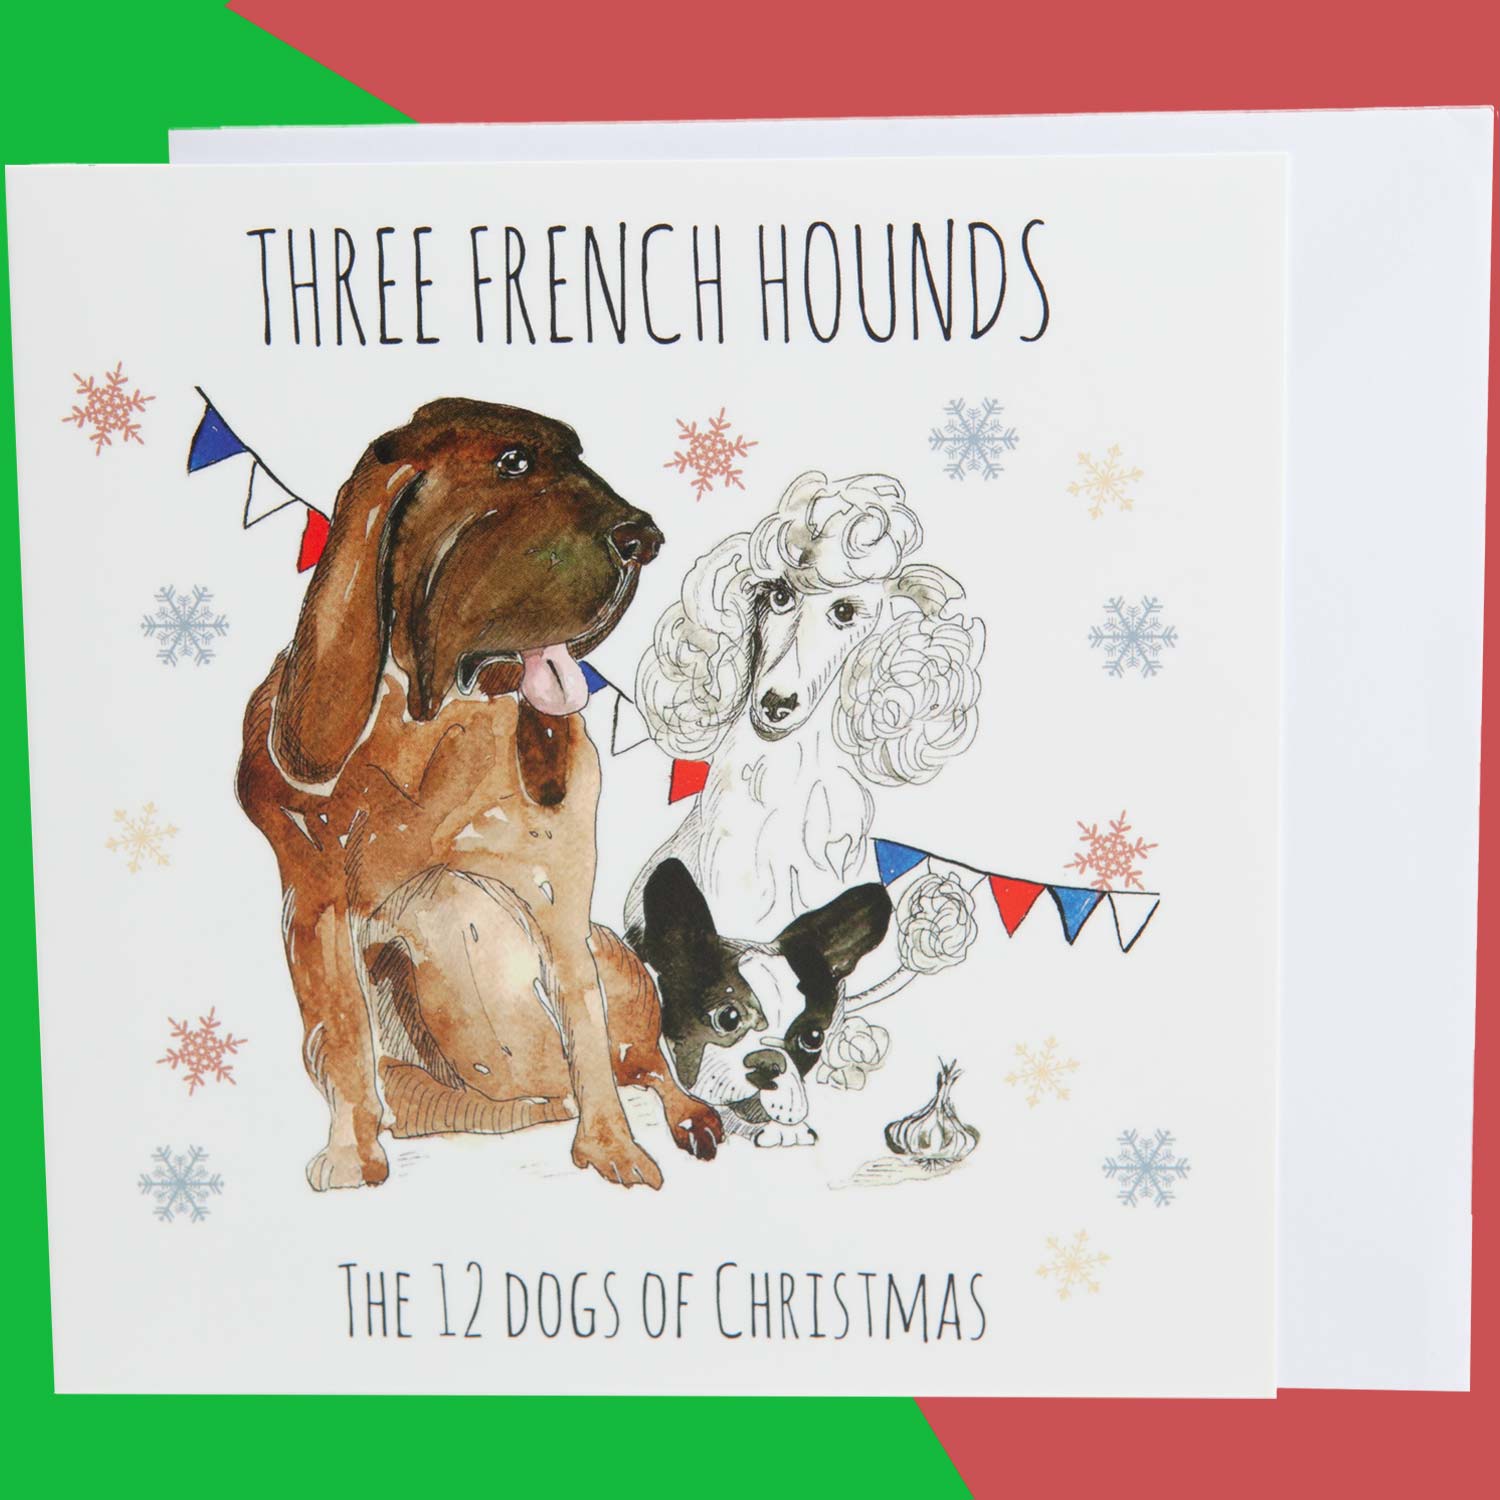 Dog Krazy Gifts - Three French Hounds - Part of the 12 Dogs of Christmas card collection available from DogKrazyGifts.co.uk